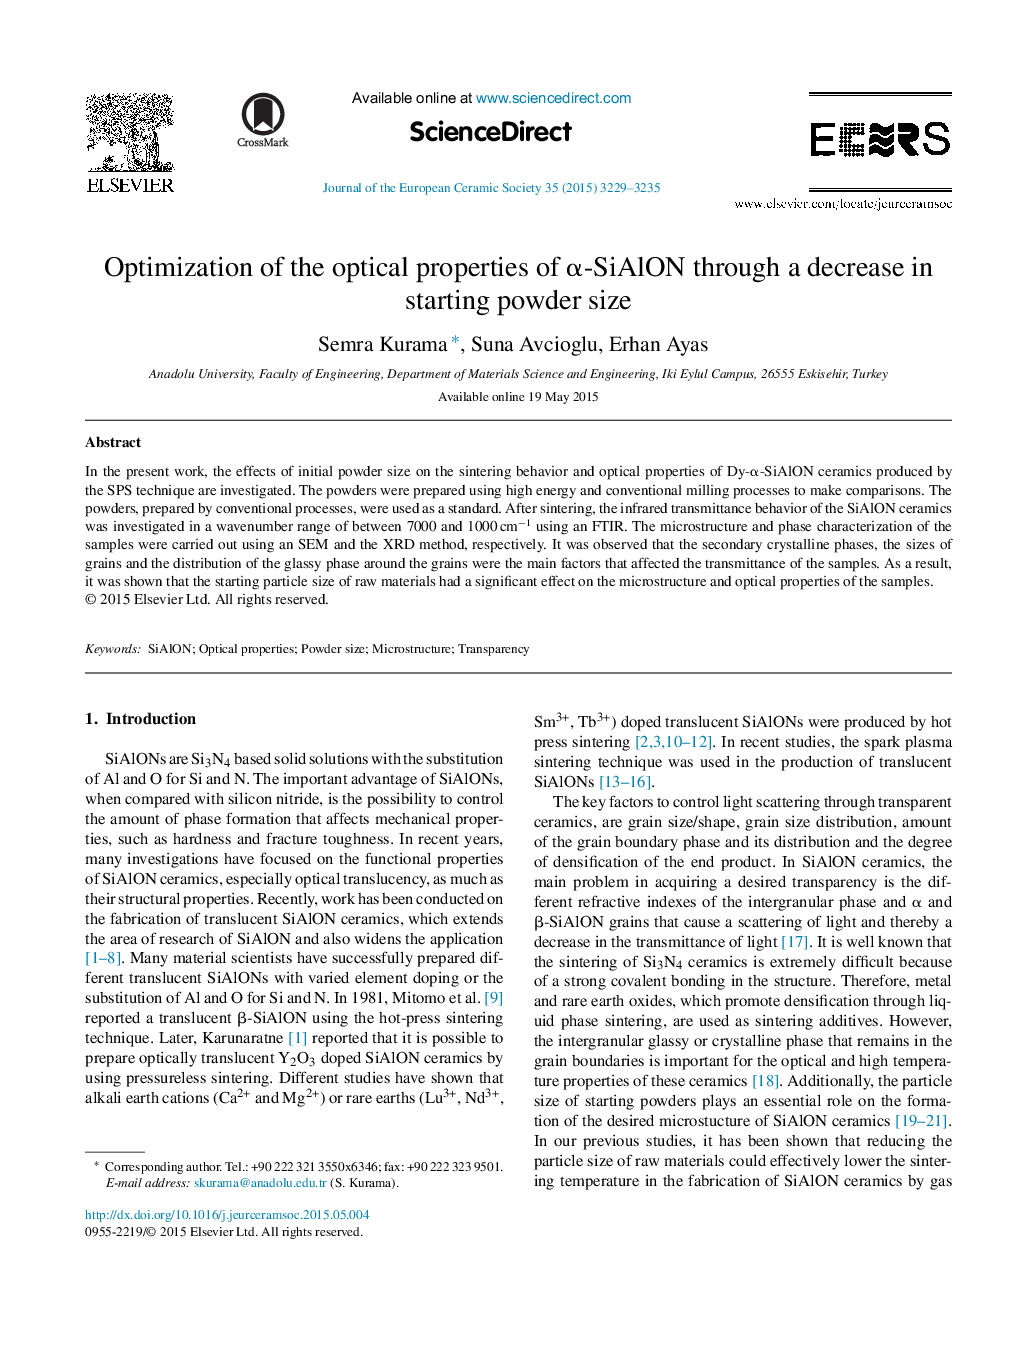 Optimization of the optical properties of α-SiAlON through a decrease in starting powder size